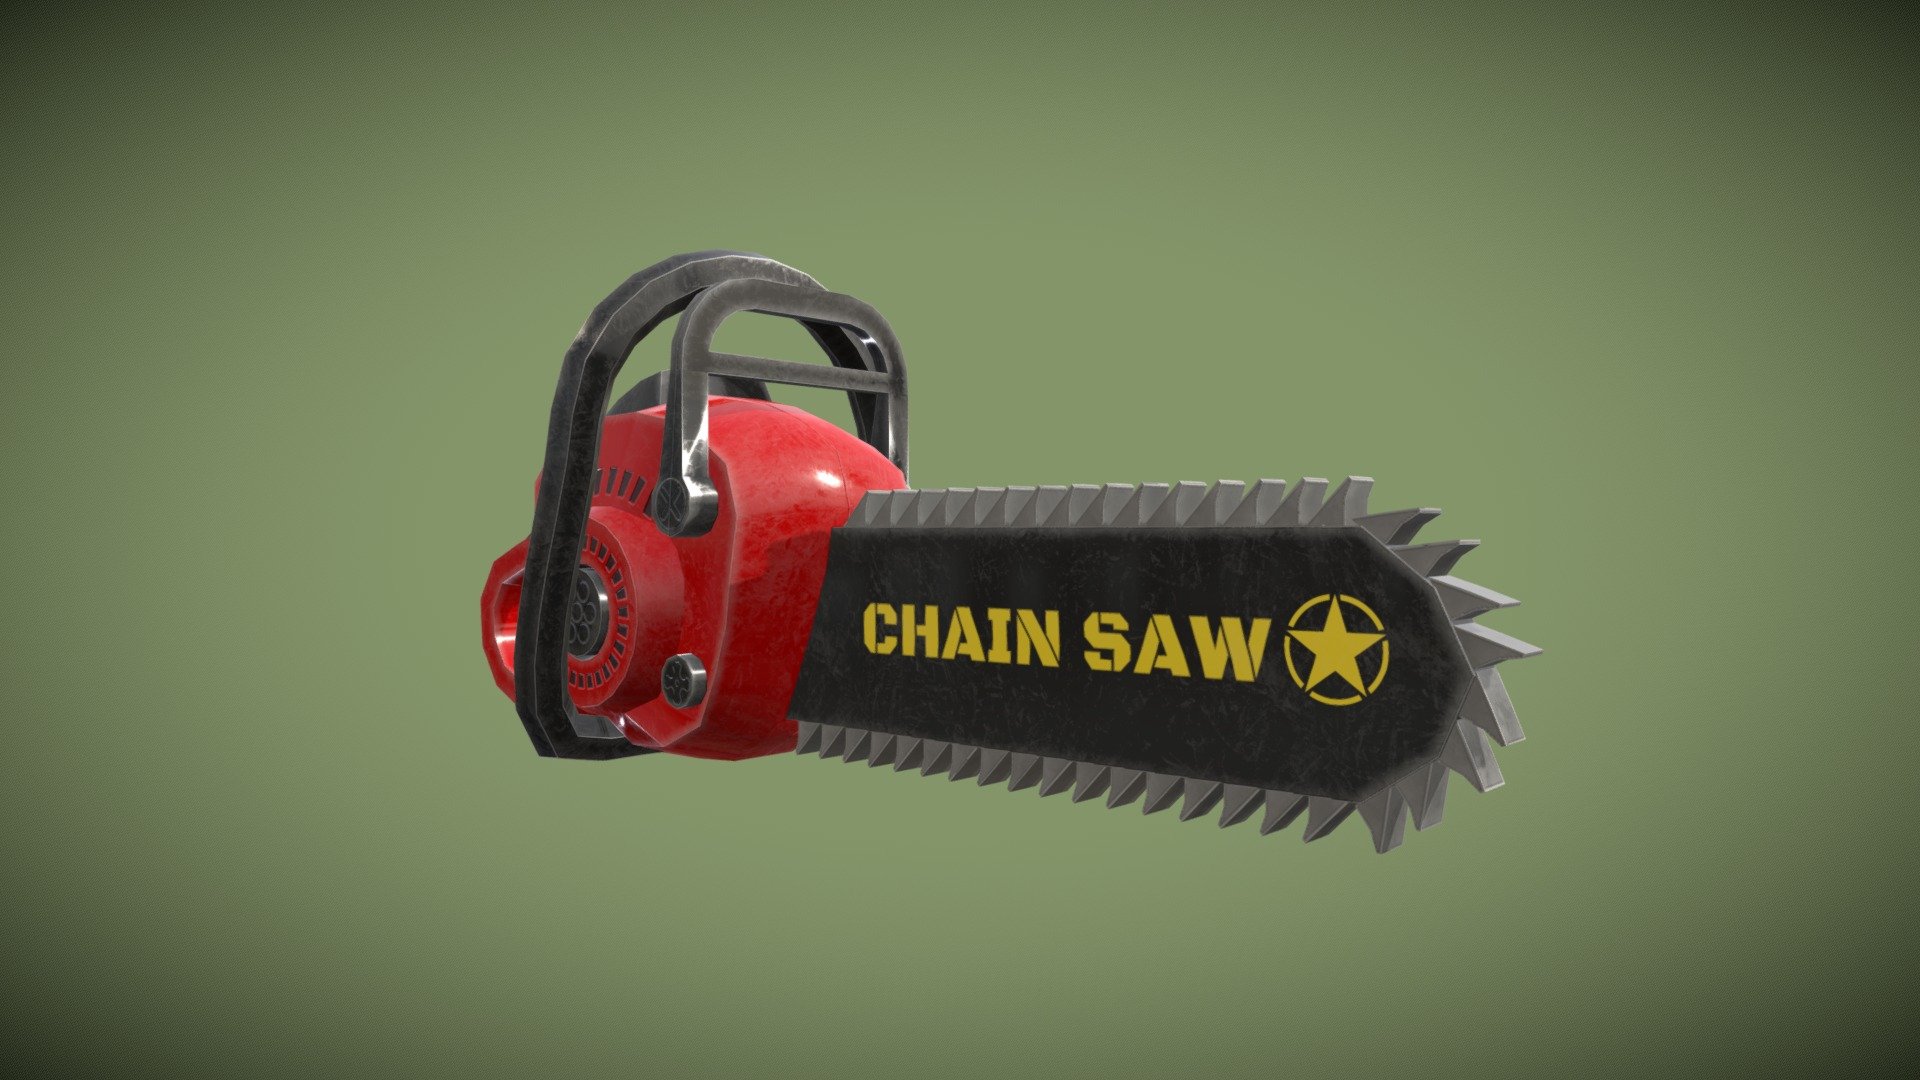 Low-poly model of toy chainsaw.
Simple yet detailed textures convey a realistic feel.
To use in video games, renders or any other project 3d model